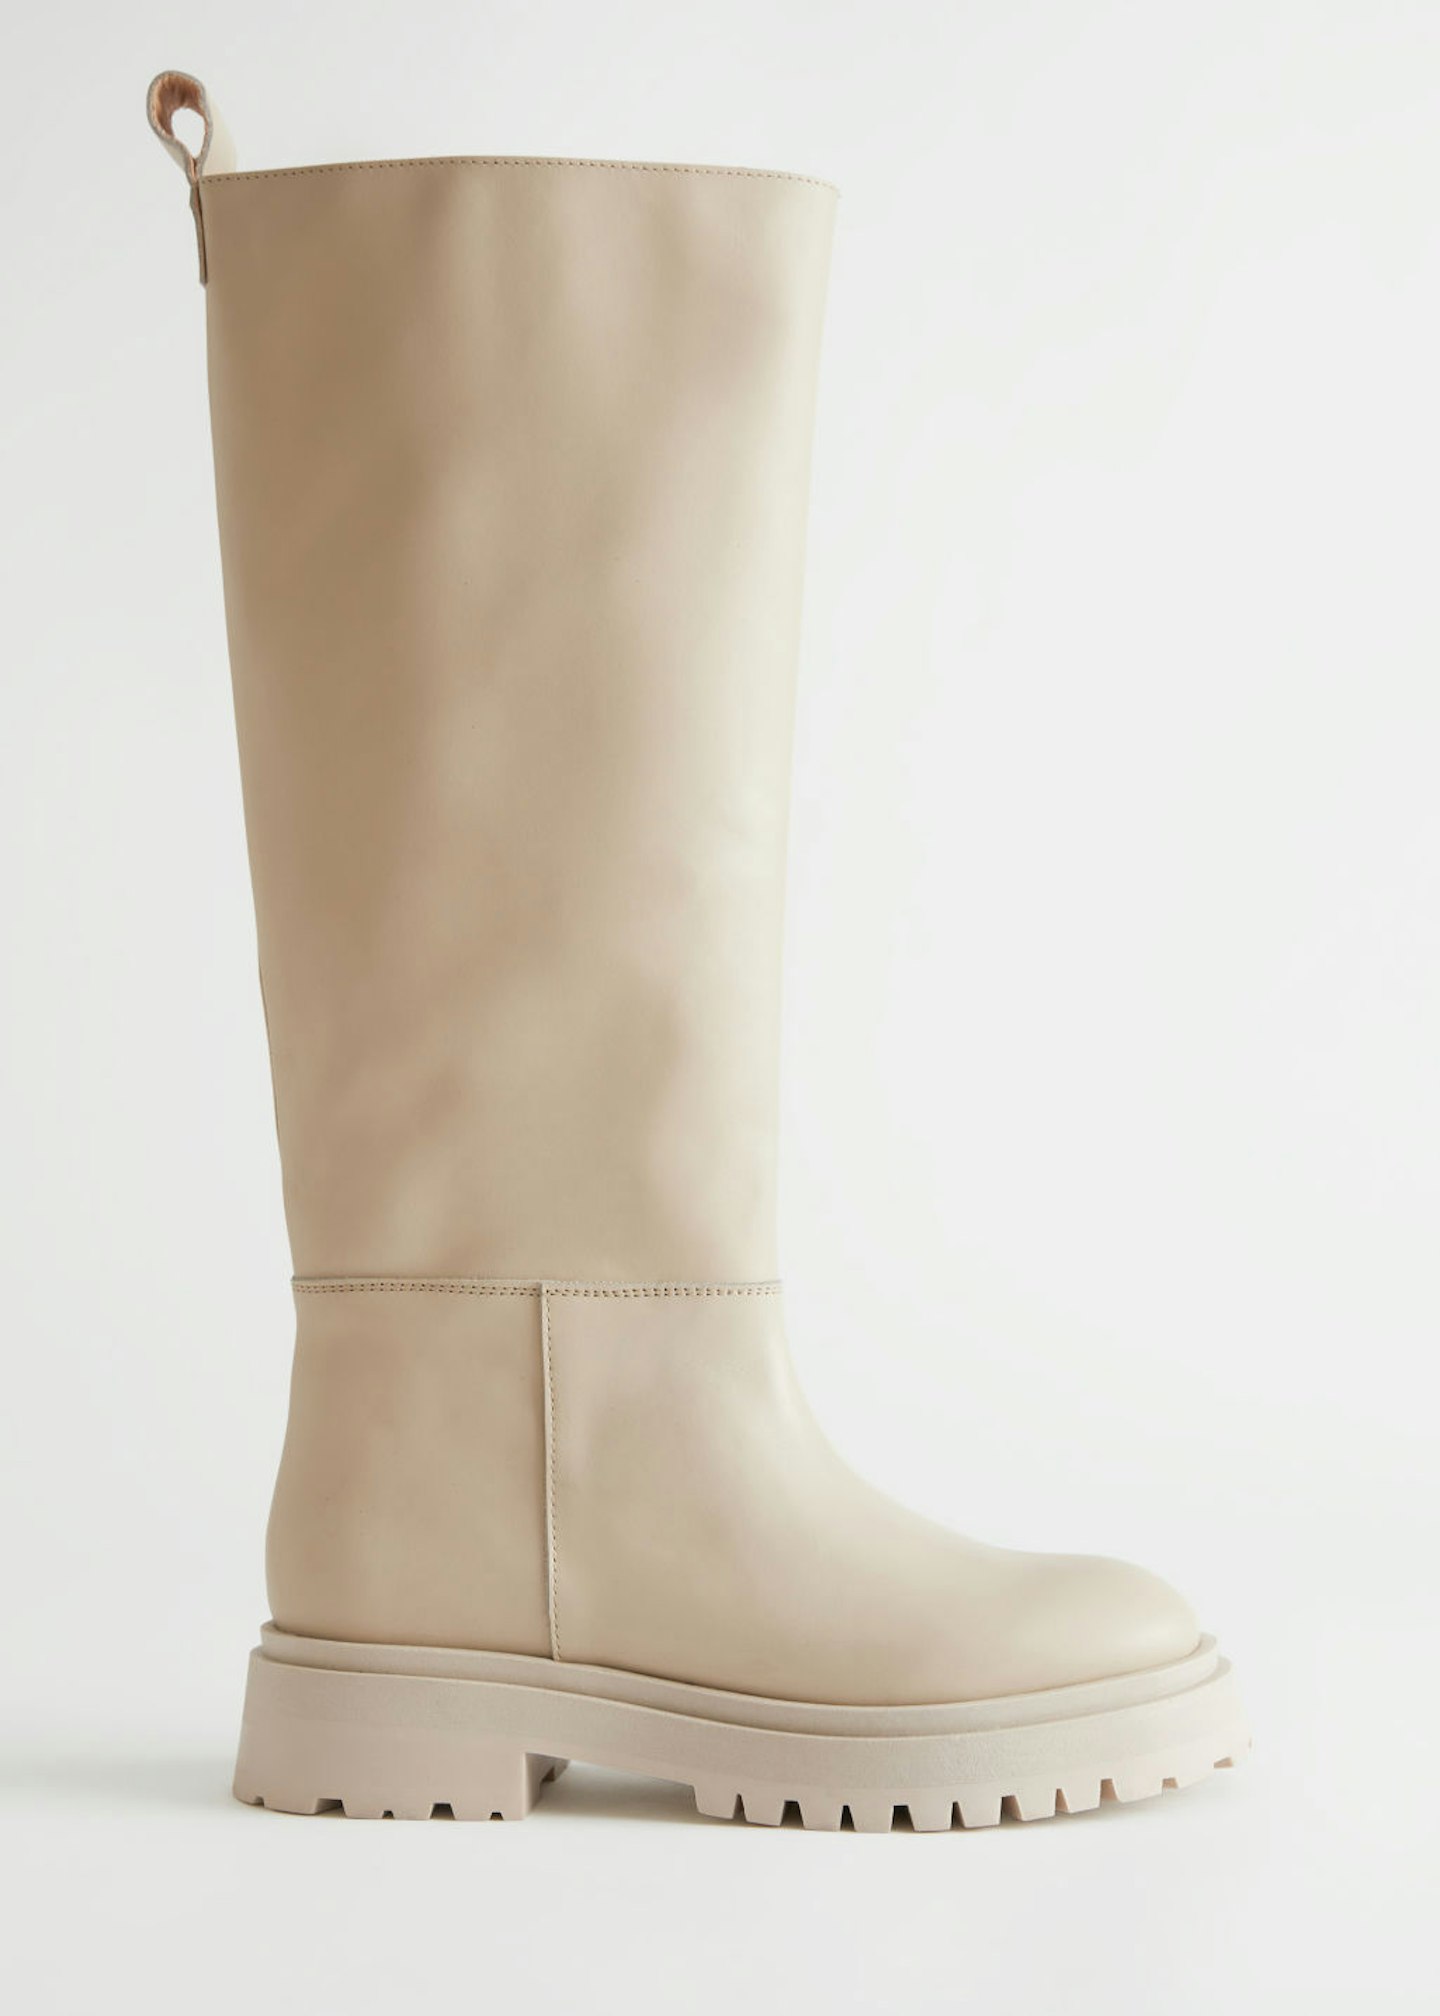 & Other Stories, Chunky Sole Tall Leather Boots, £205